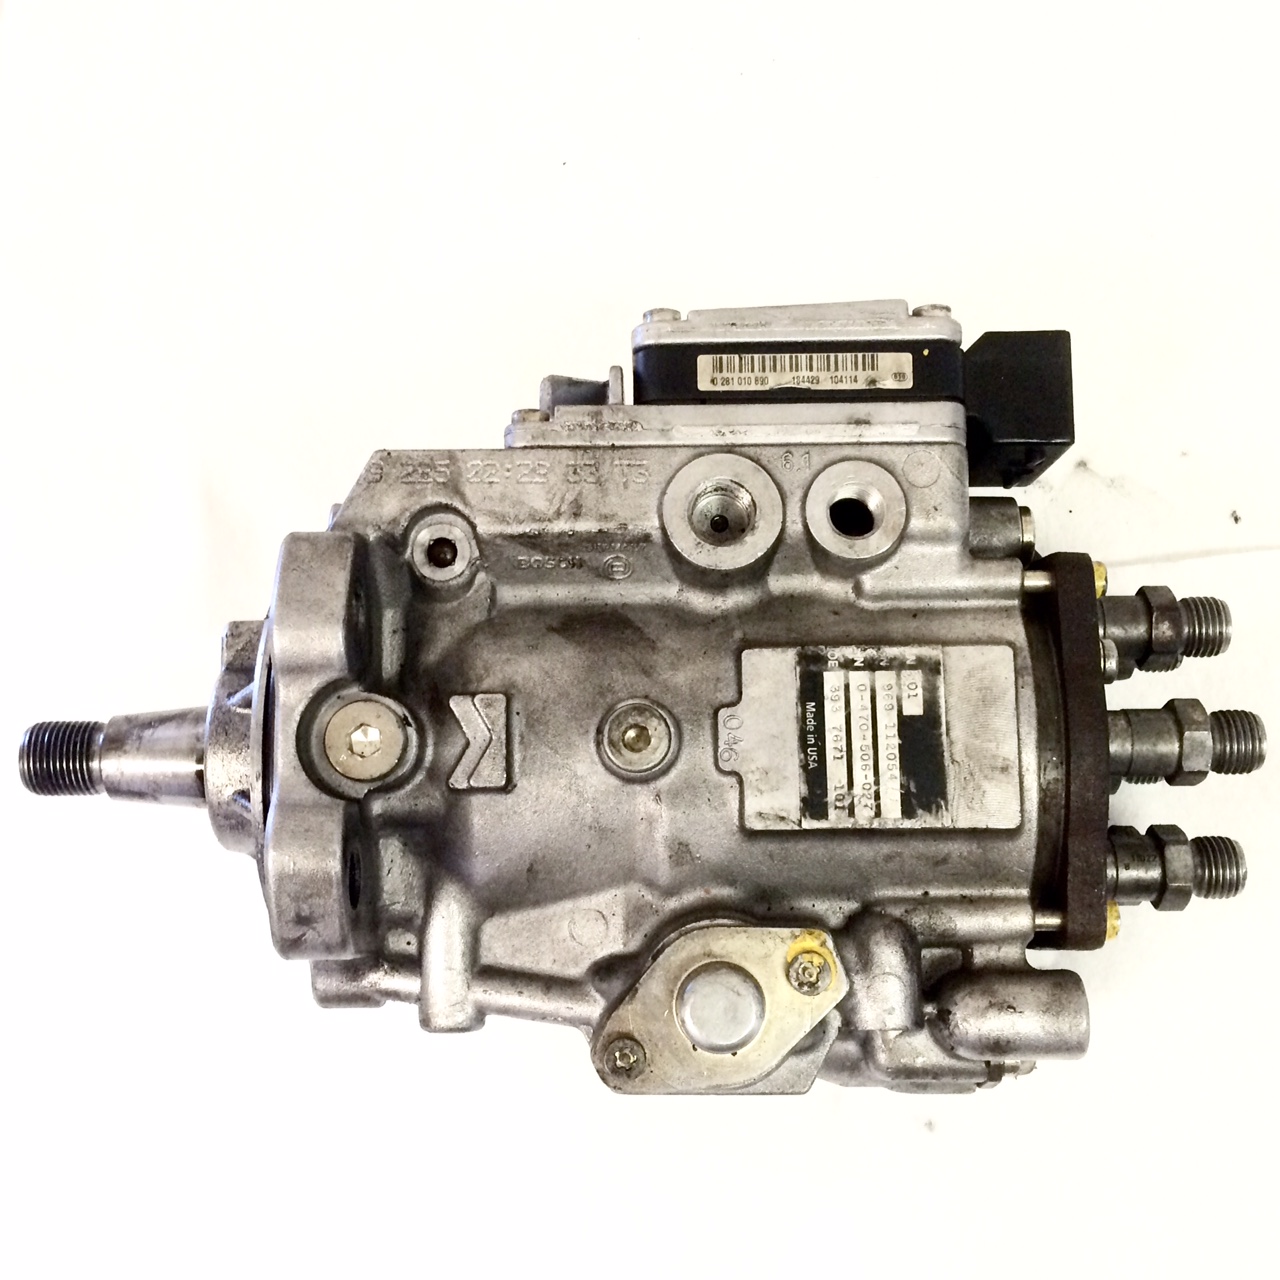 Injection pump for 5.9 cummins certificate coverage highmark